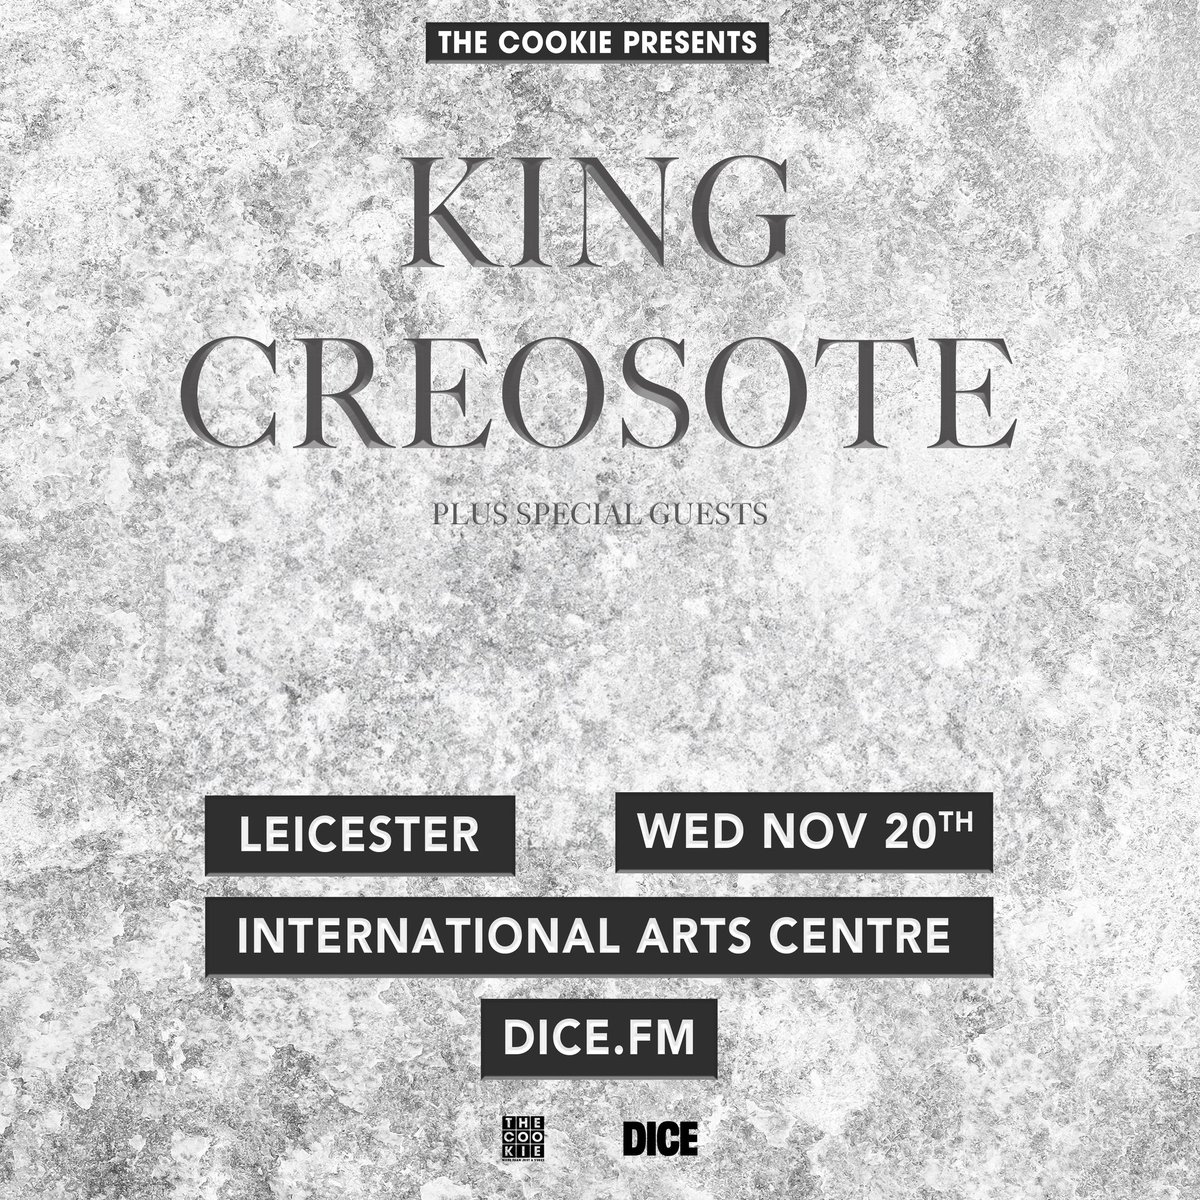 We’re pleased to announce the wonderful King Creosote will be joining us at the International Arts Centre on 20th November. Tickets available tomorrow from 10am.